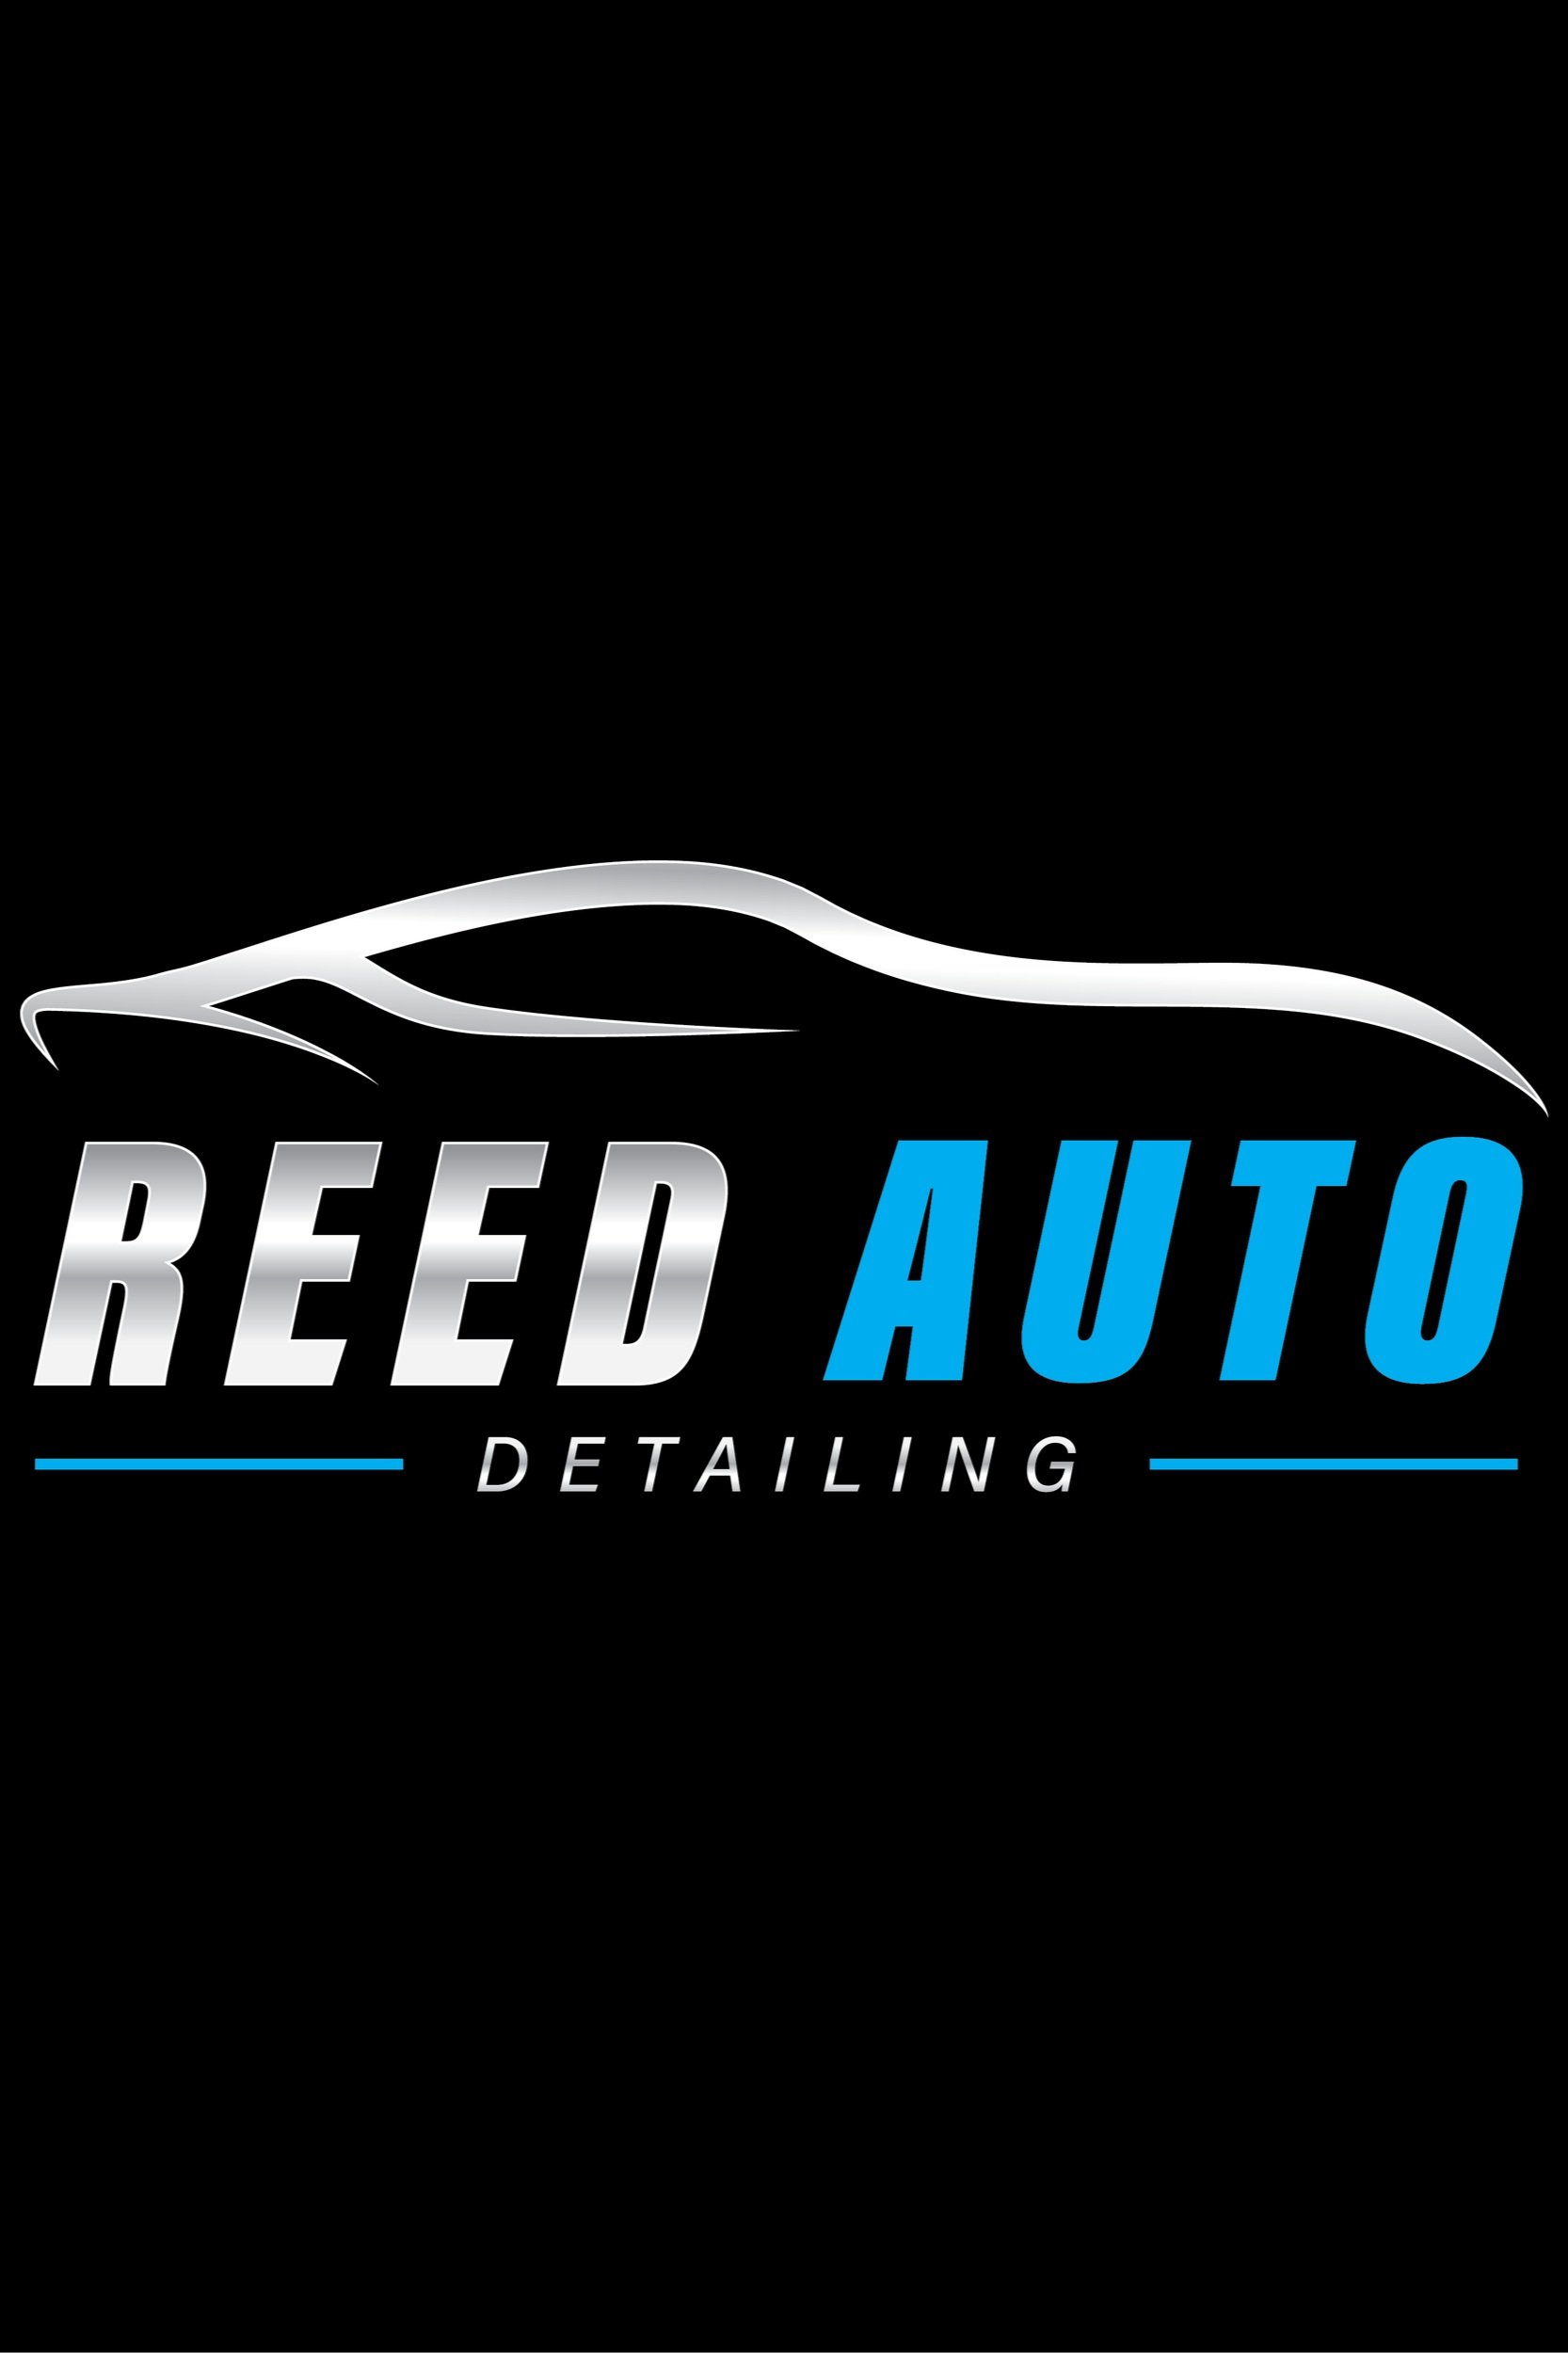 Reed-Union Corporation - DetailingWiki, the free wiki for detailers